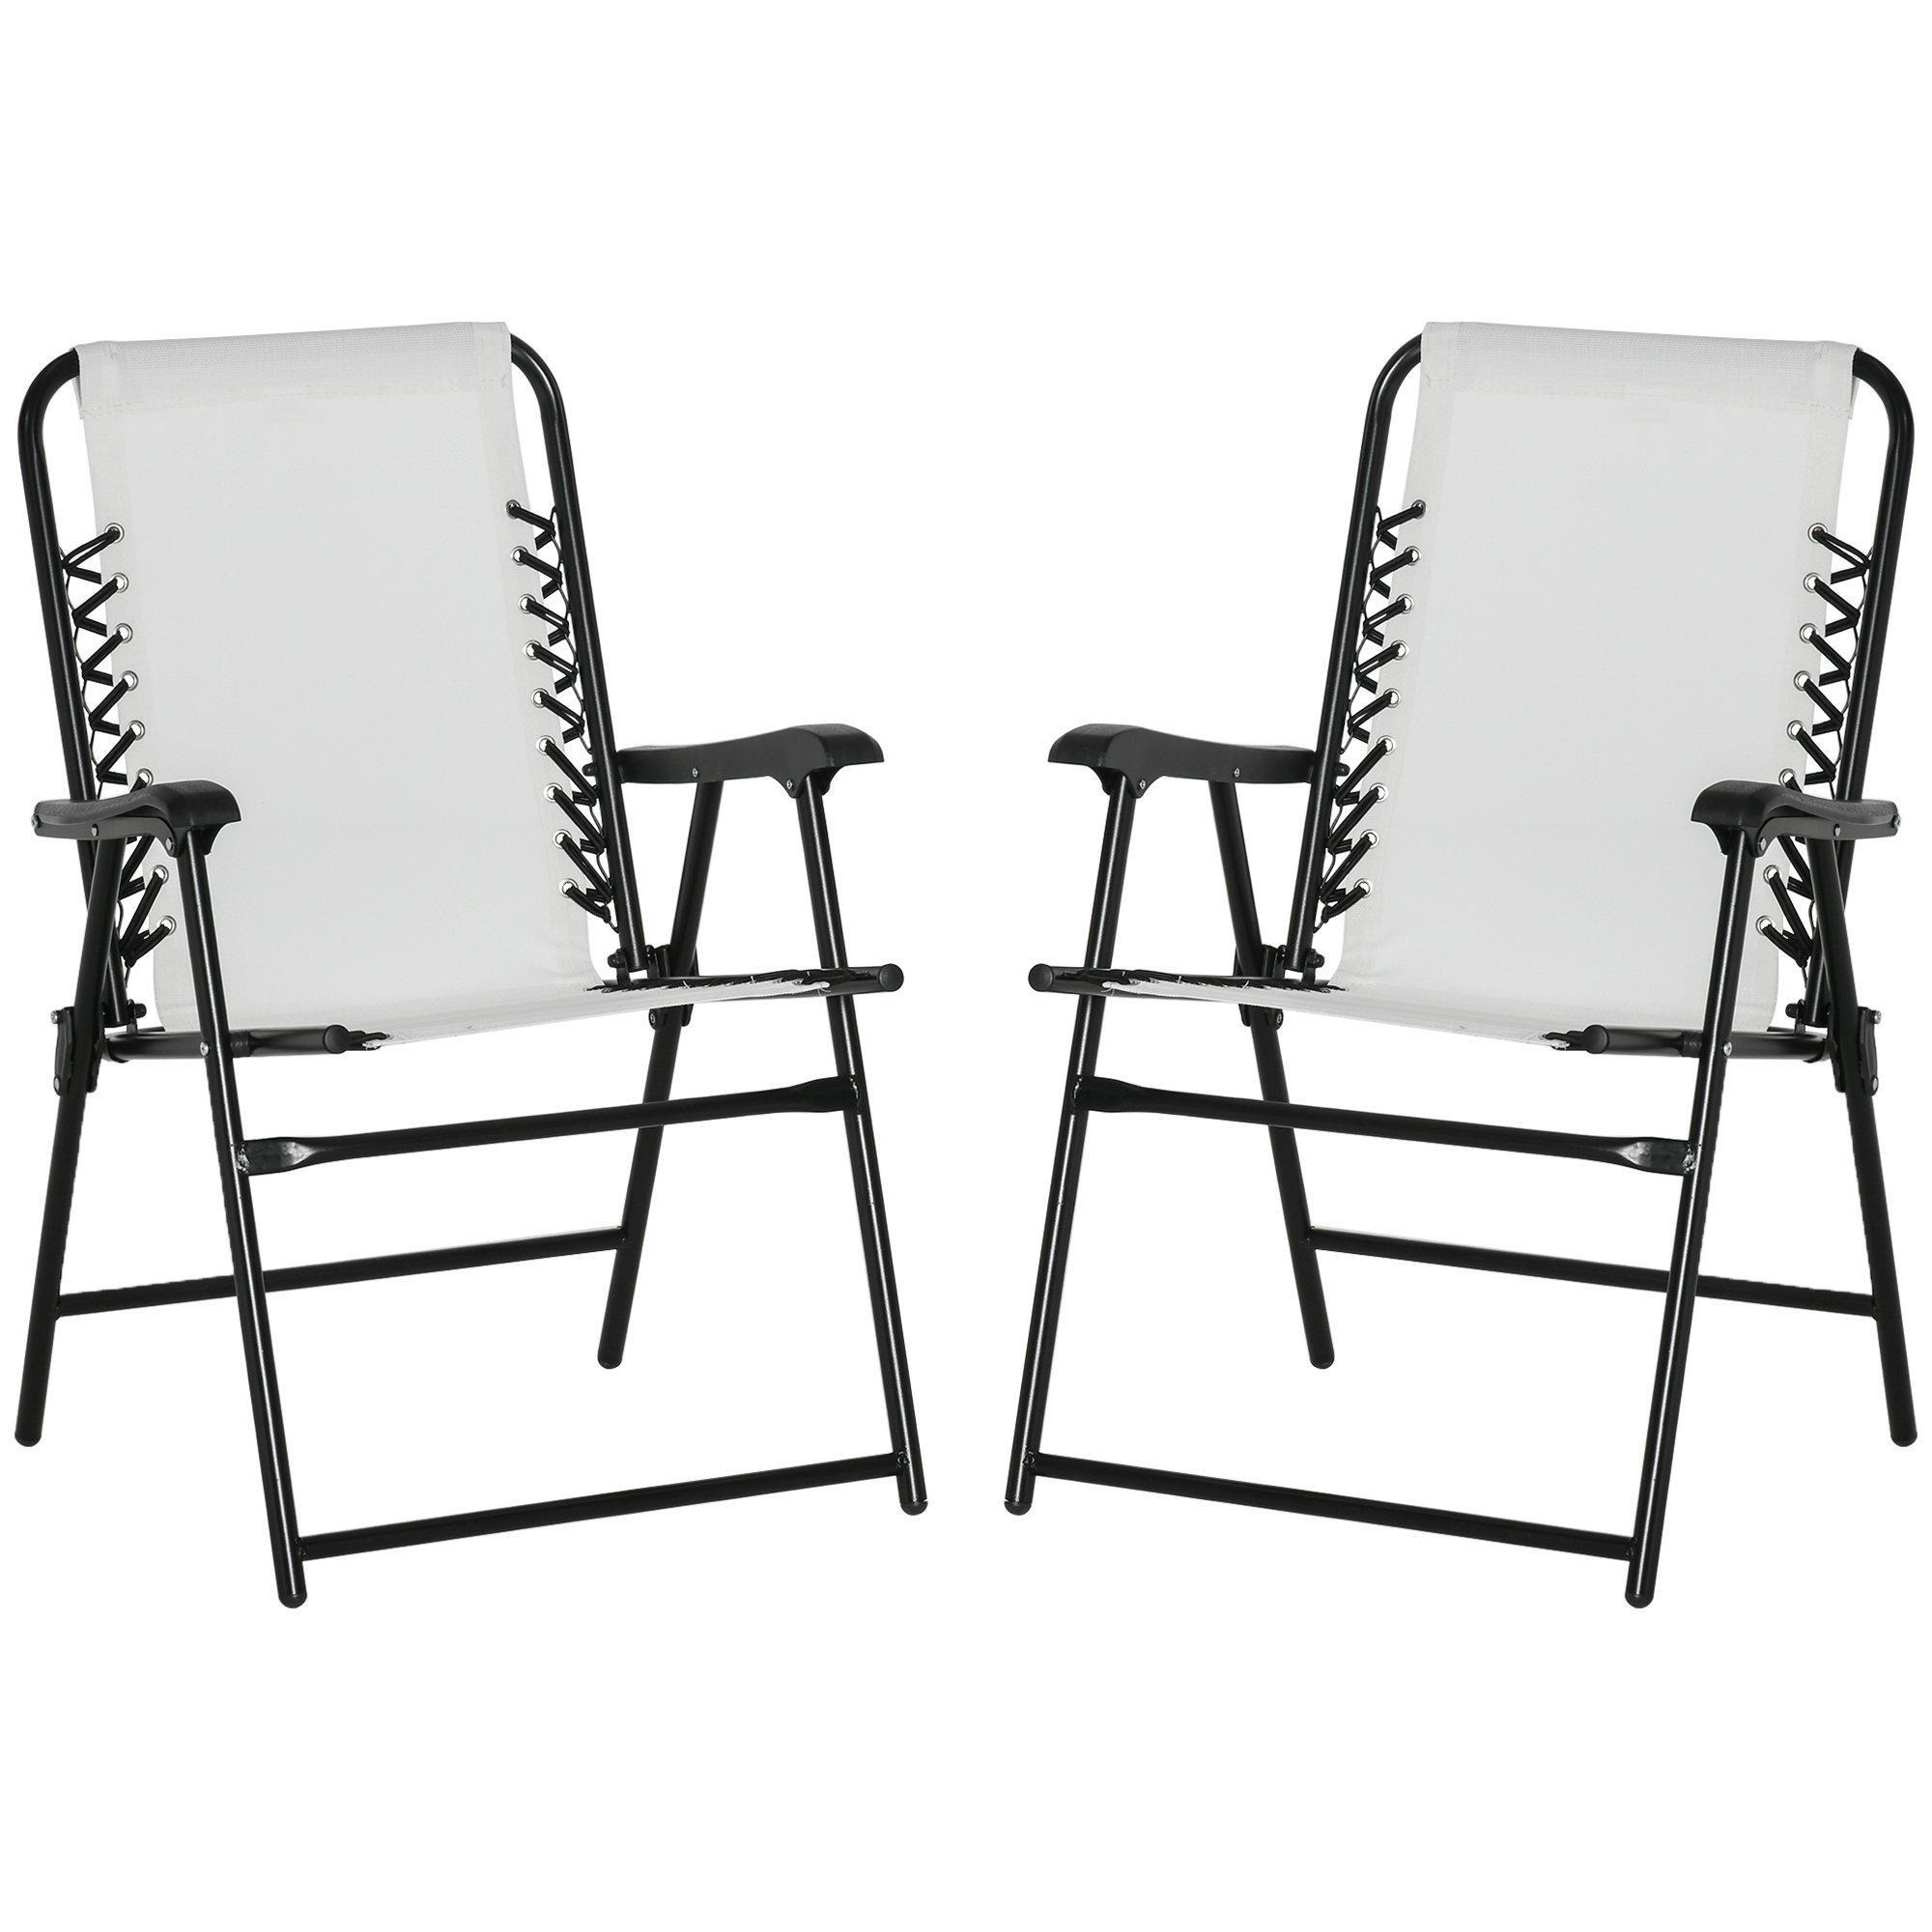 2Pcs Outdoor Patio Folding Chairs, Portable Garden Loungers - image 1